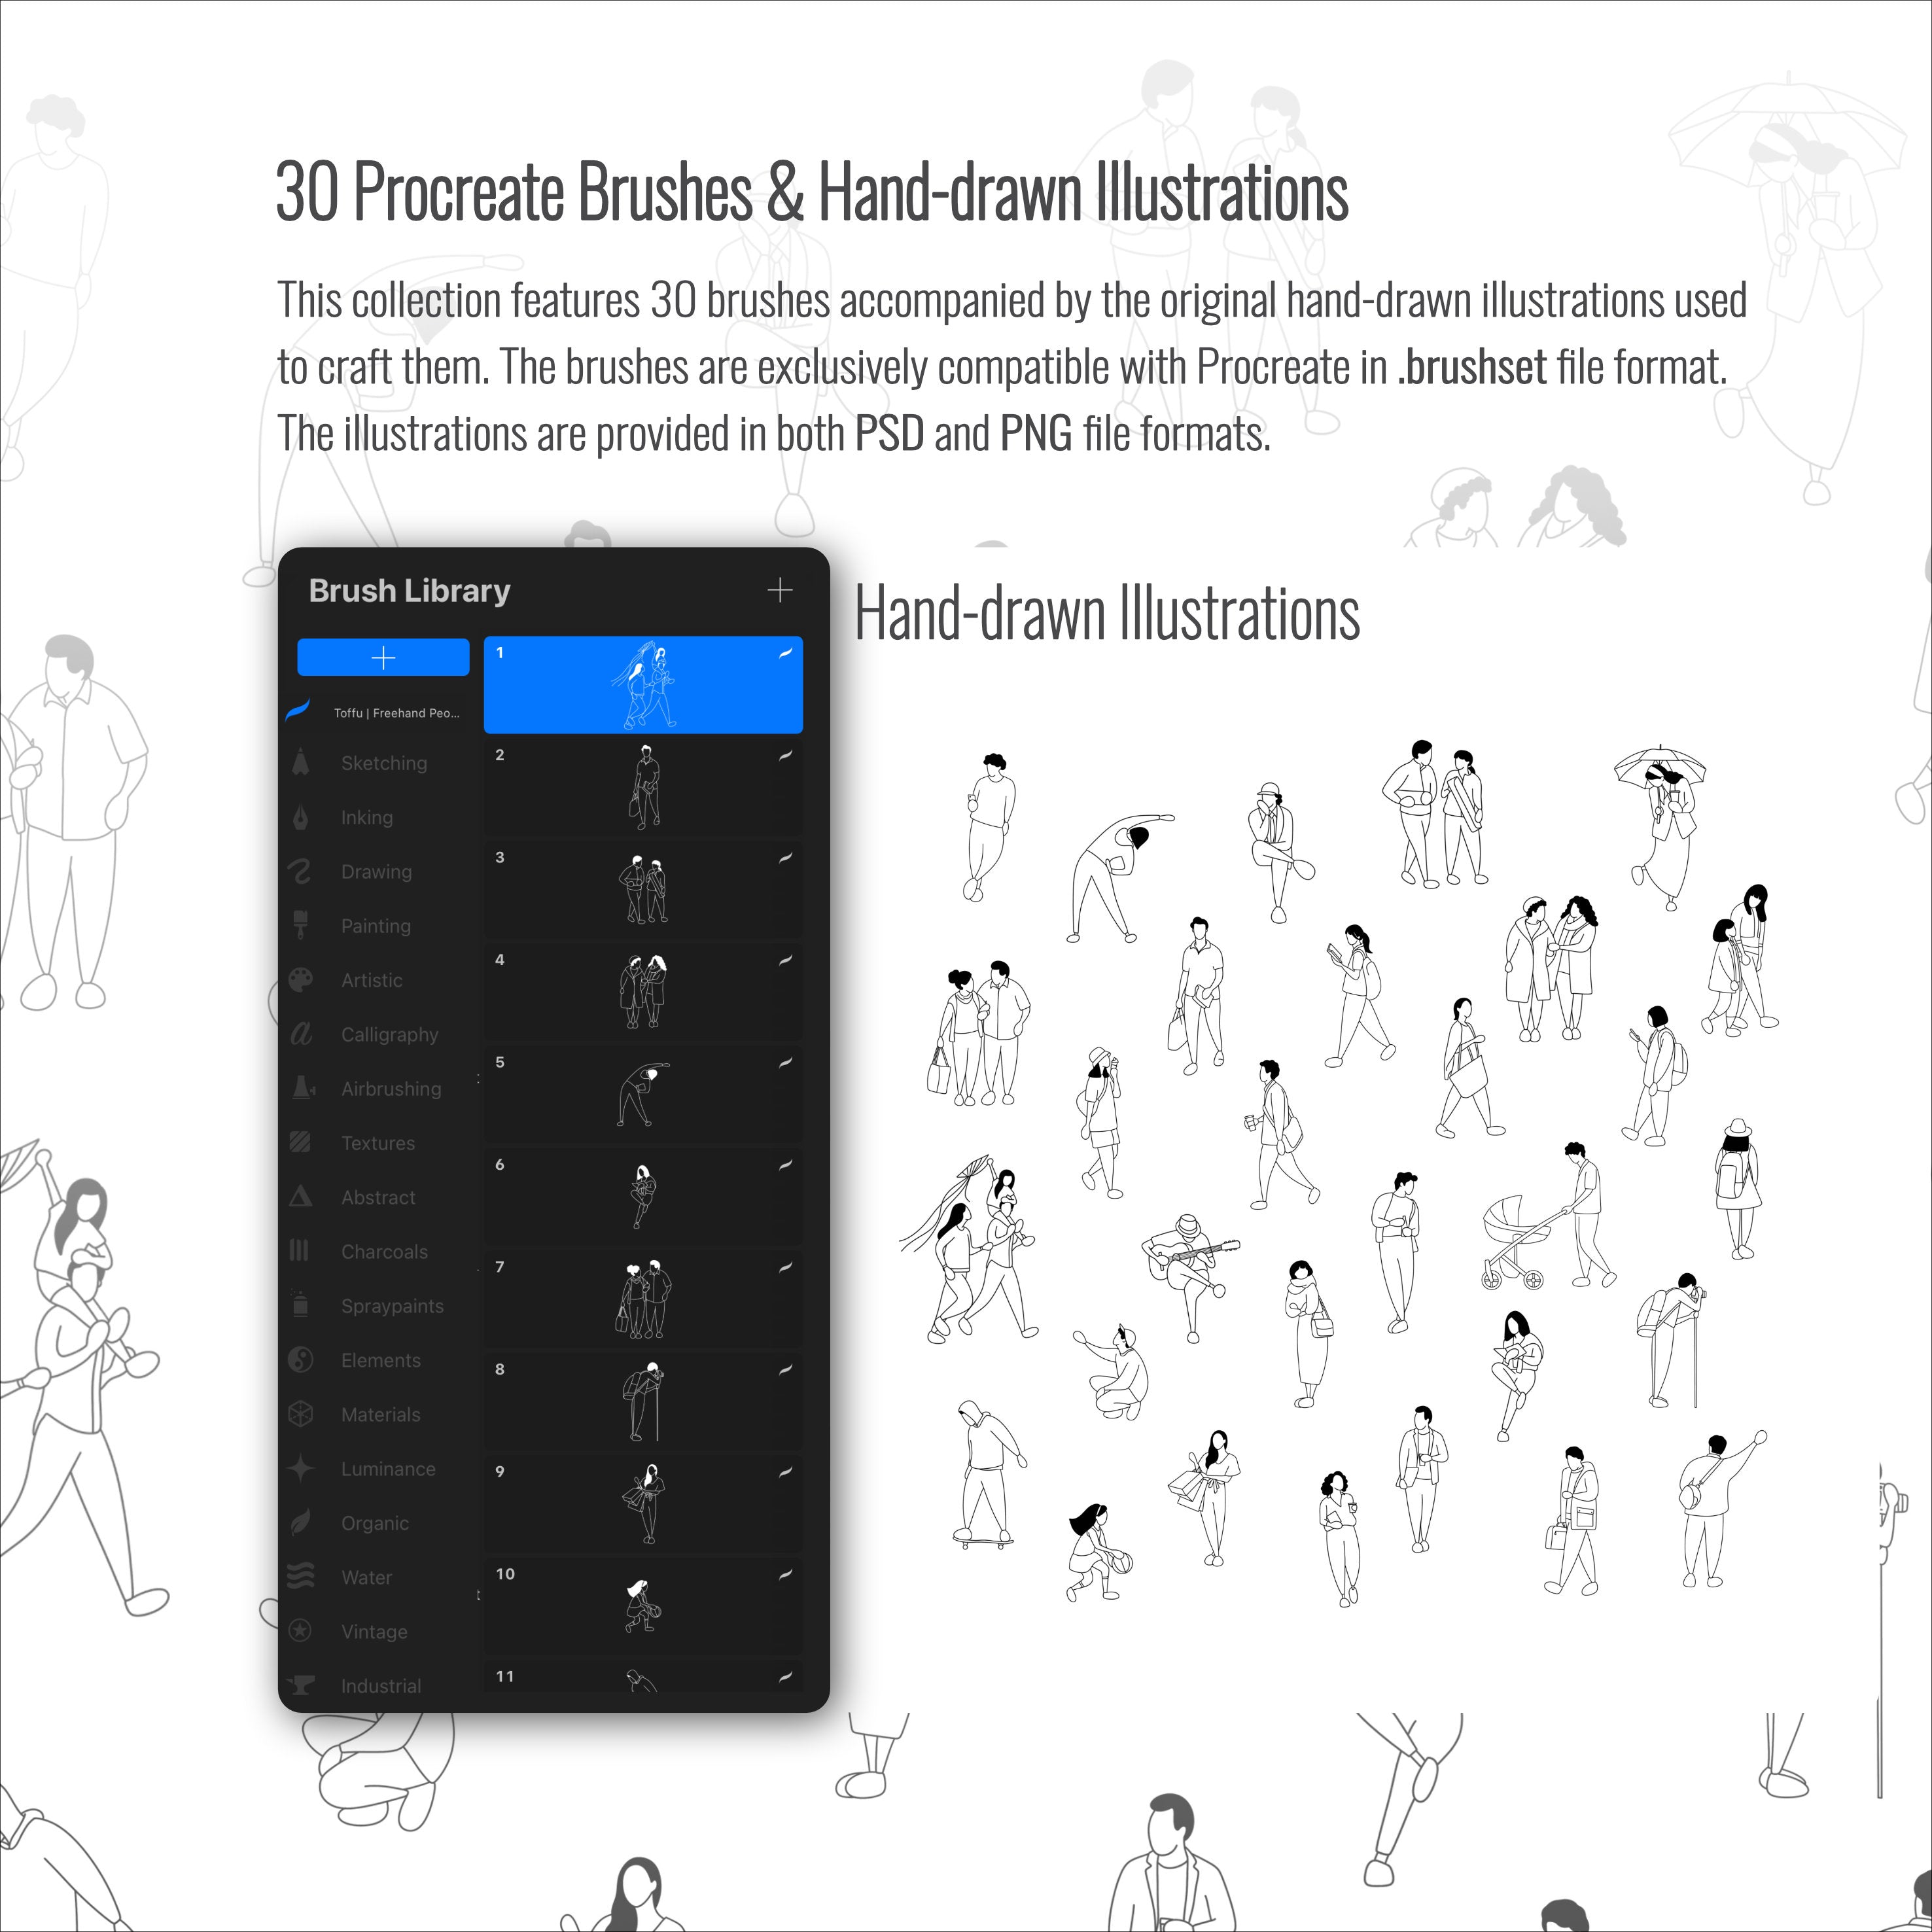 Procreate Freehand People Brushset & Illustrations PNG - Toffu Co